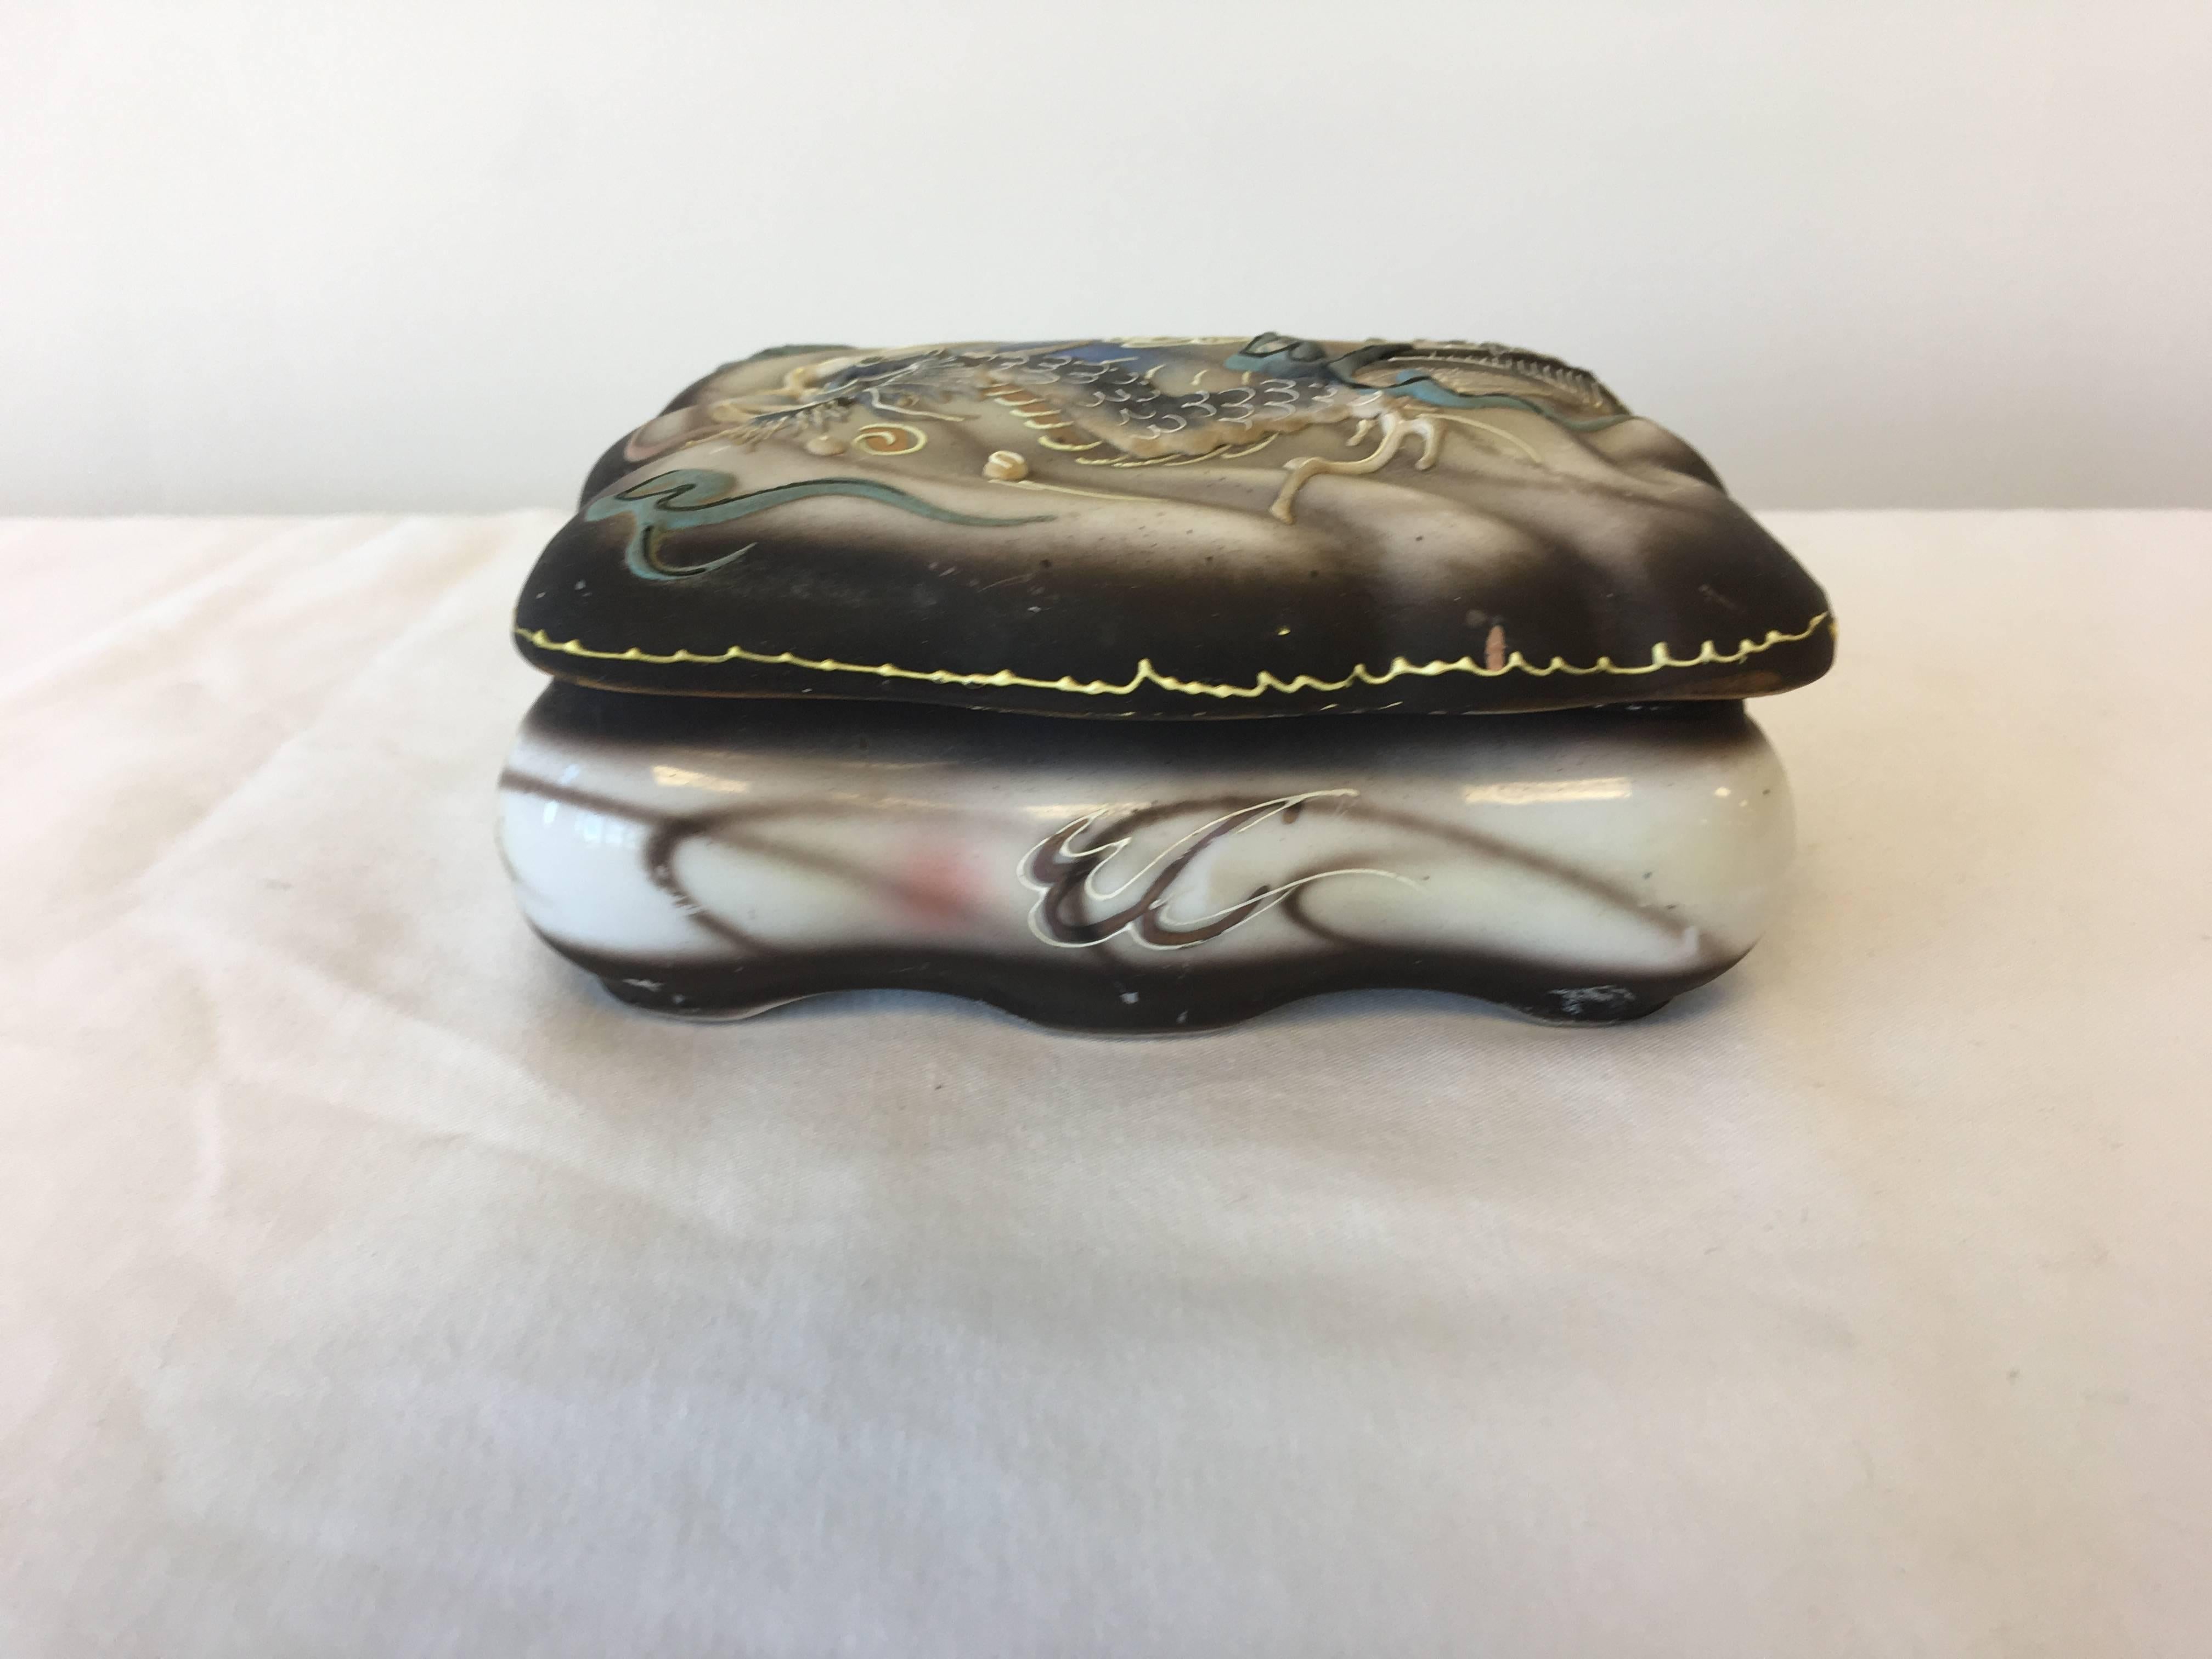 Offered is a fabulous, 1920's Art Deco Chinoiserie, decorative ceramic trinket box with a hand-painted dragon motif.